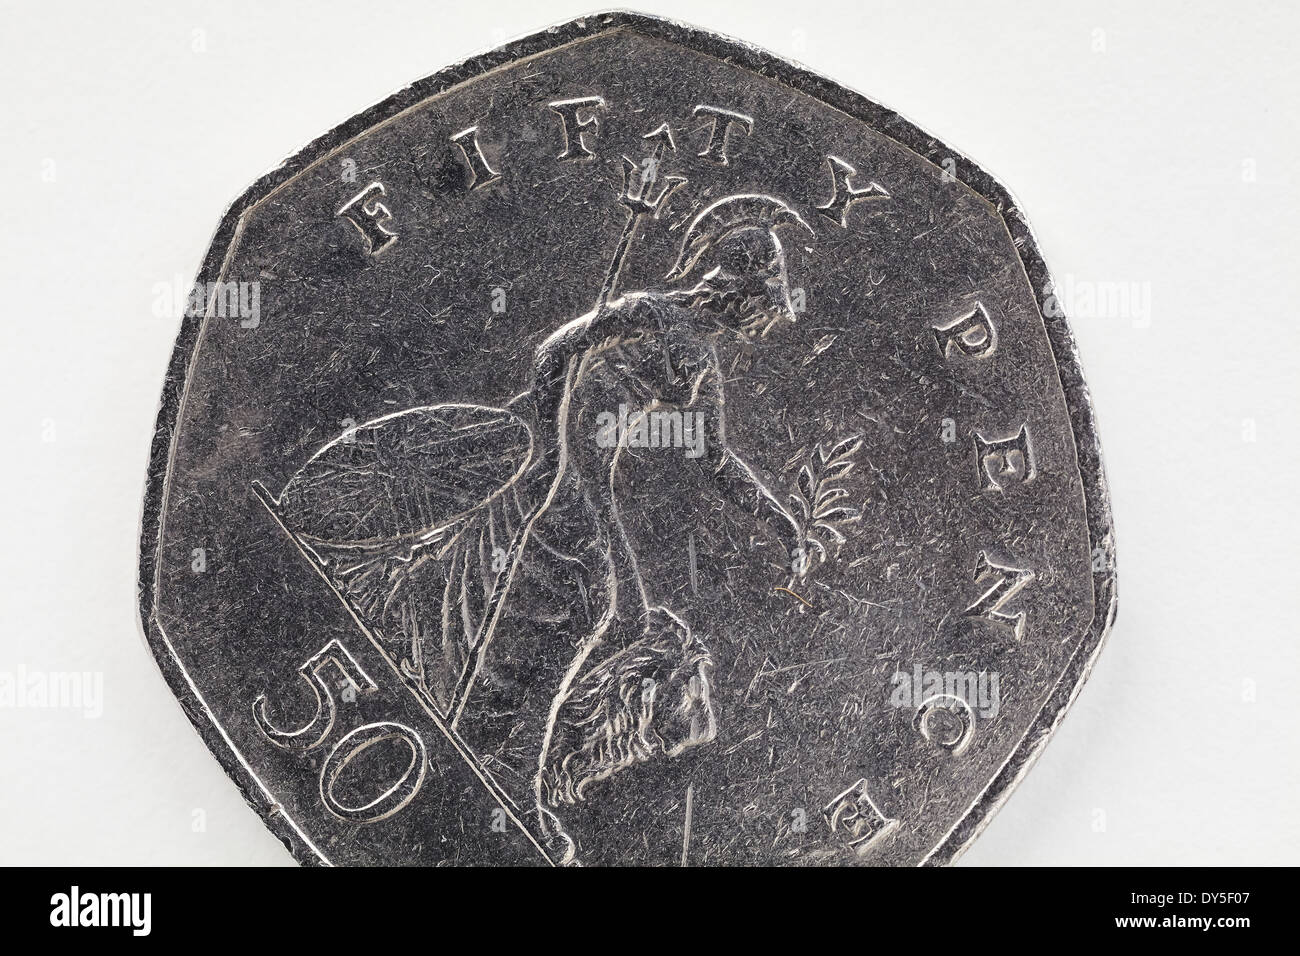 Fifty pence piece, close-up. Stock Photo